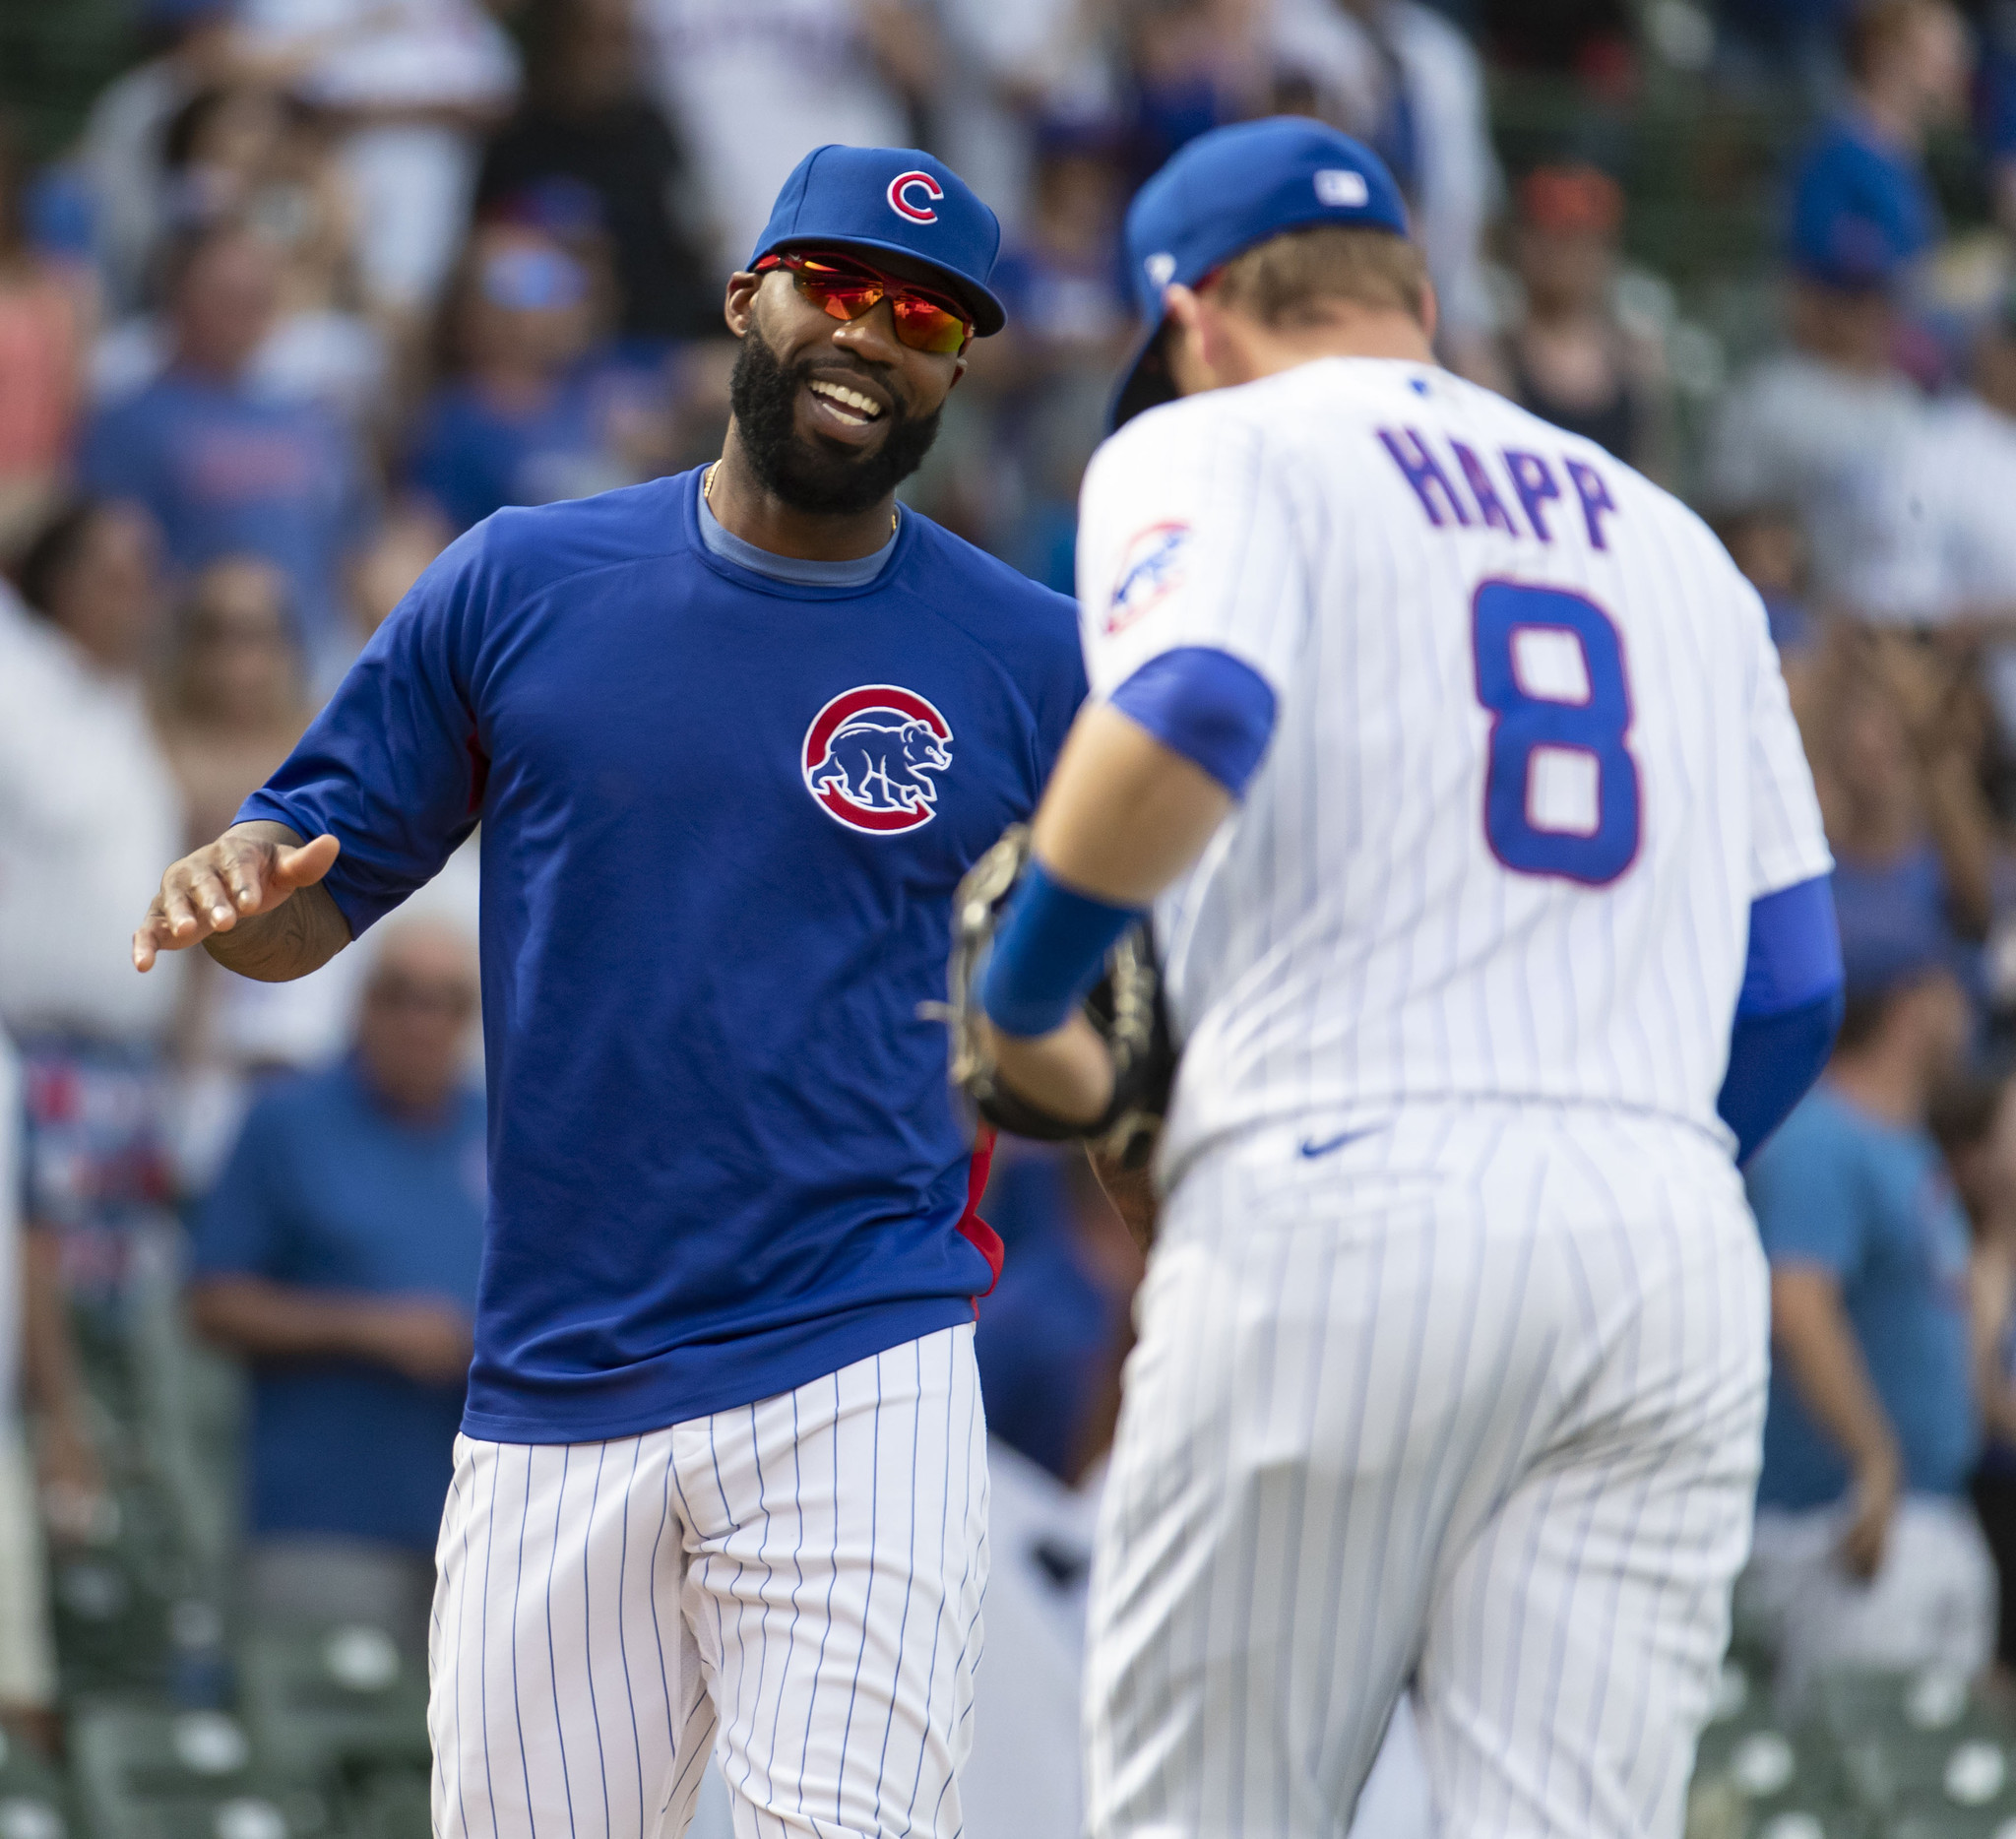 Here's what the Cubs could do with Jason Heyward - Bleed Cubbie Blue